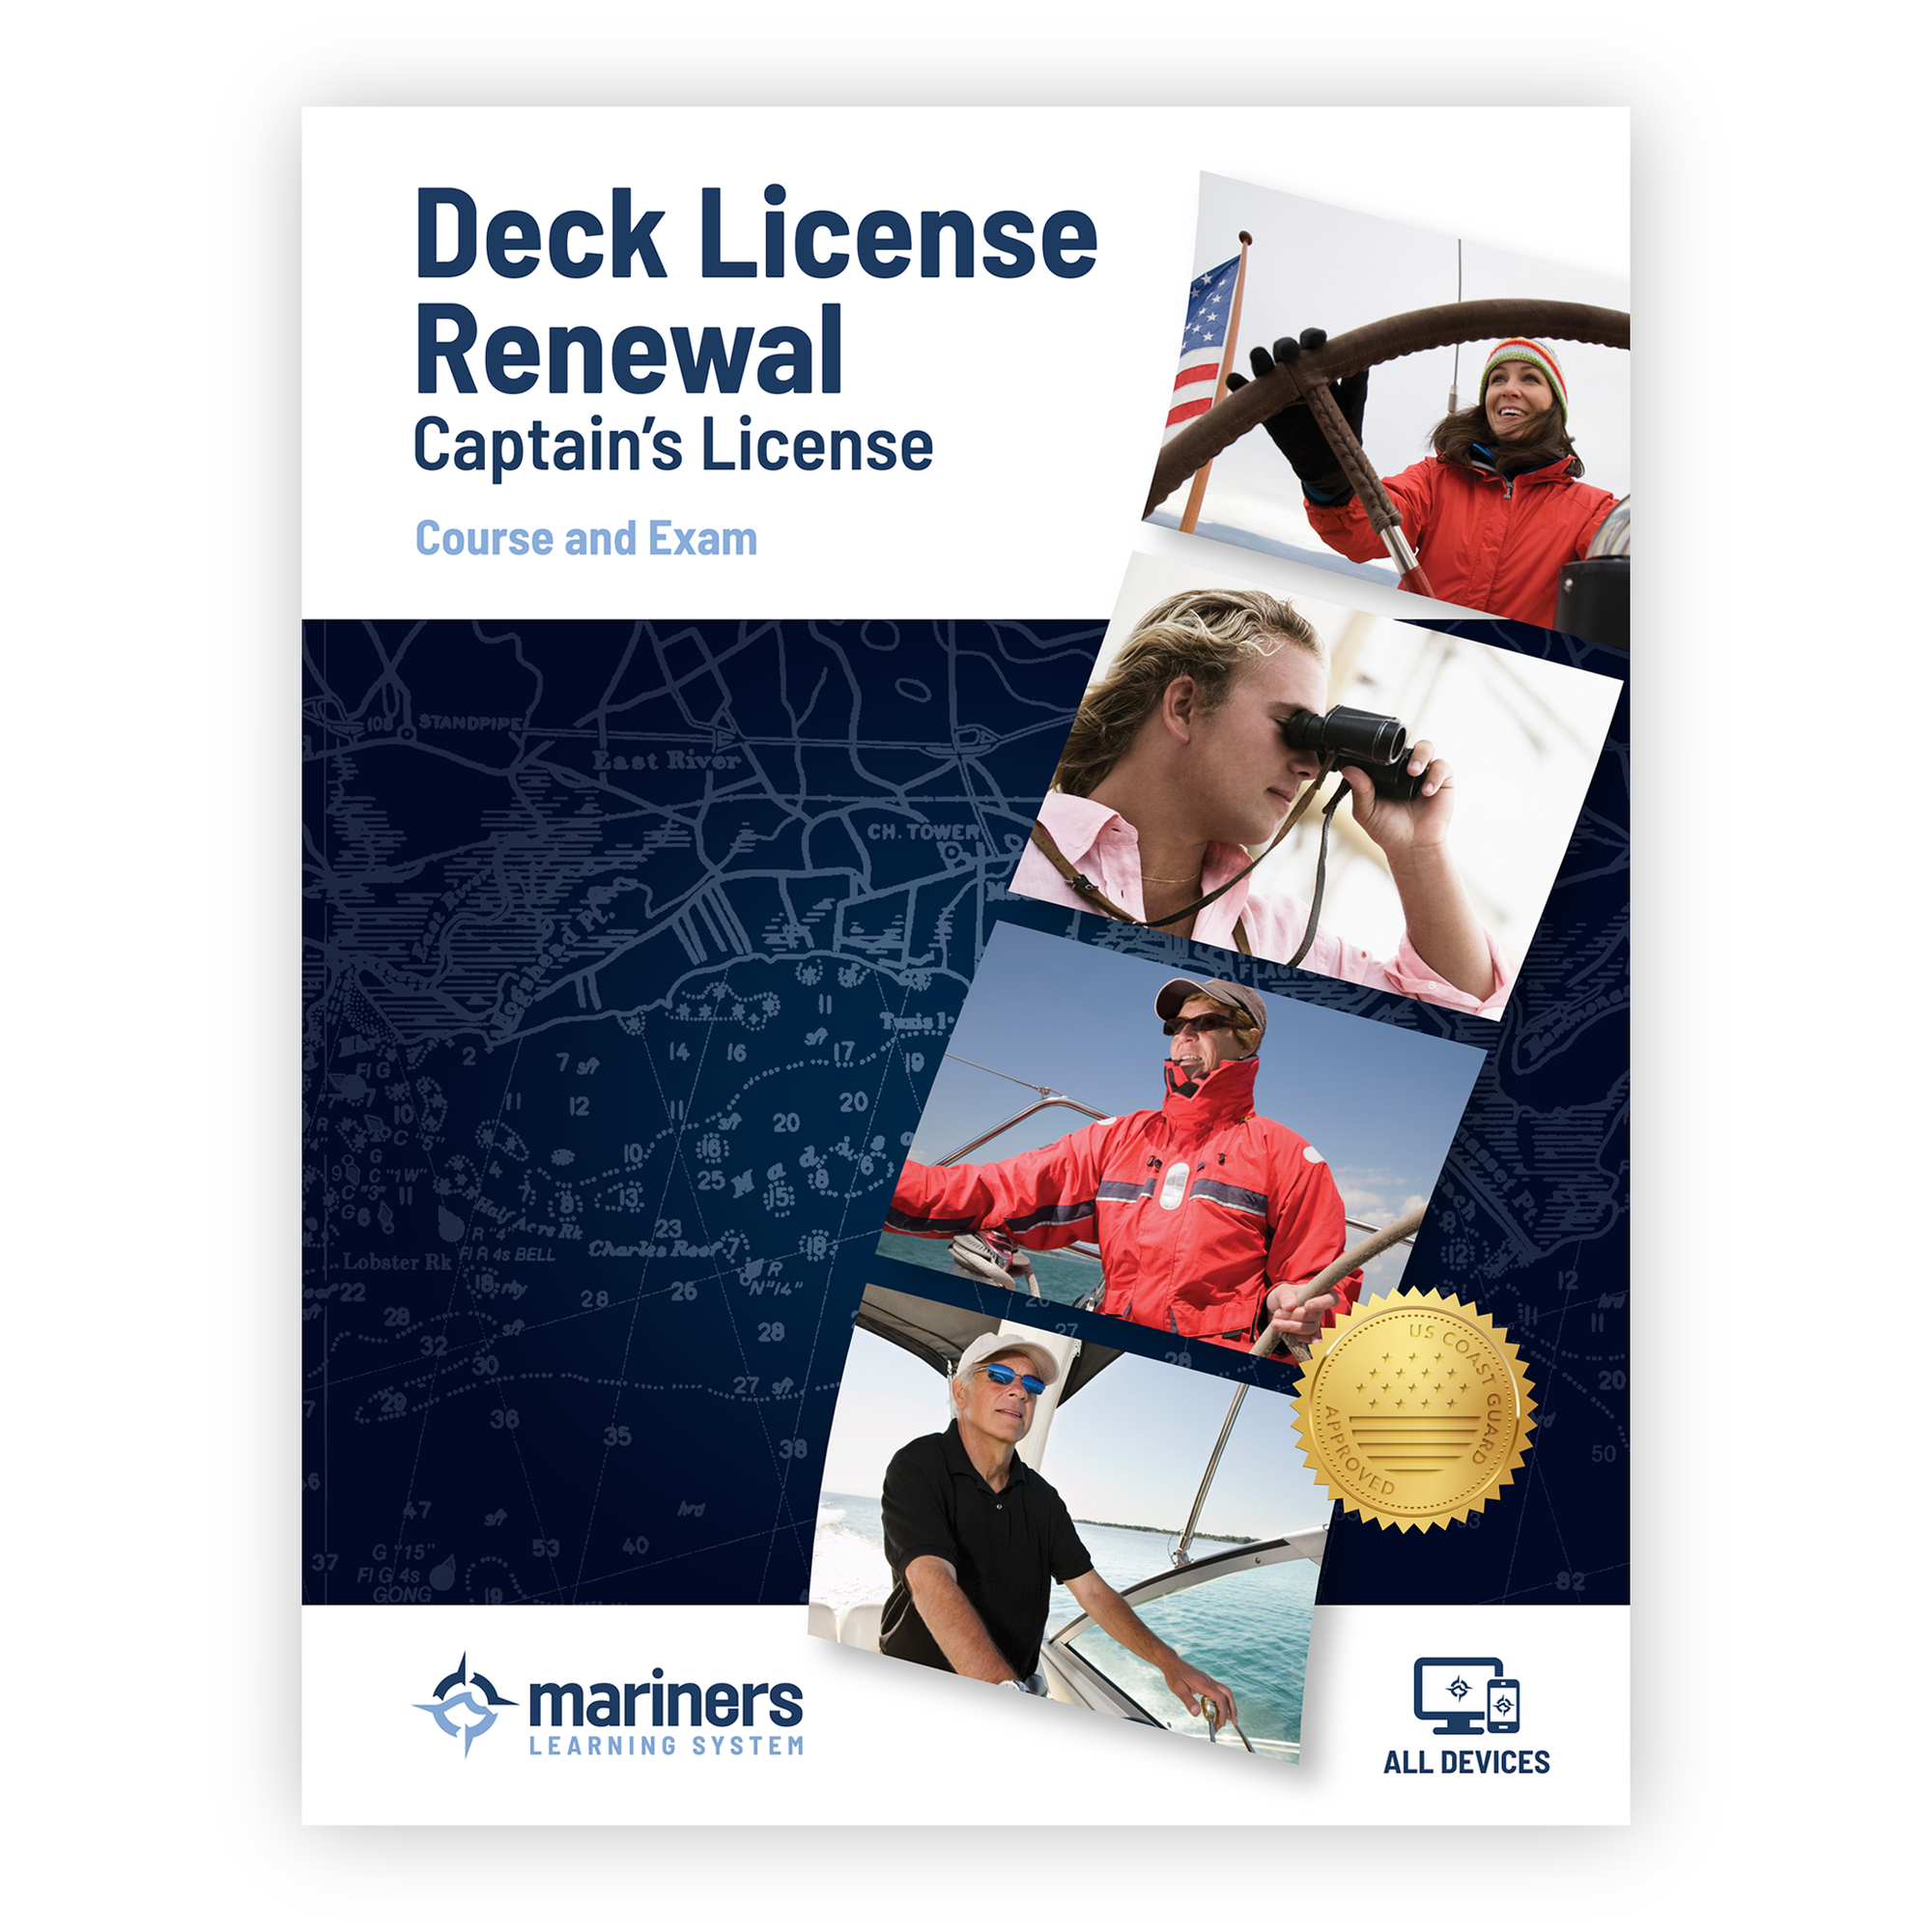 Deck License Renewal - Online Course and Exam